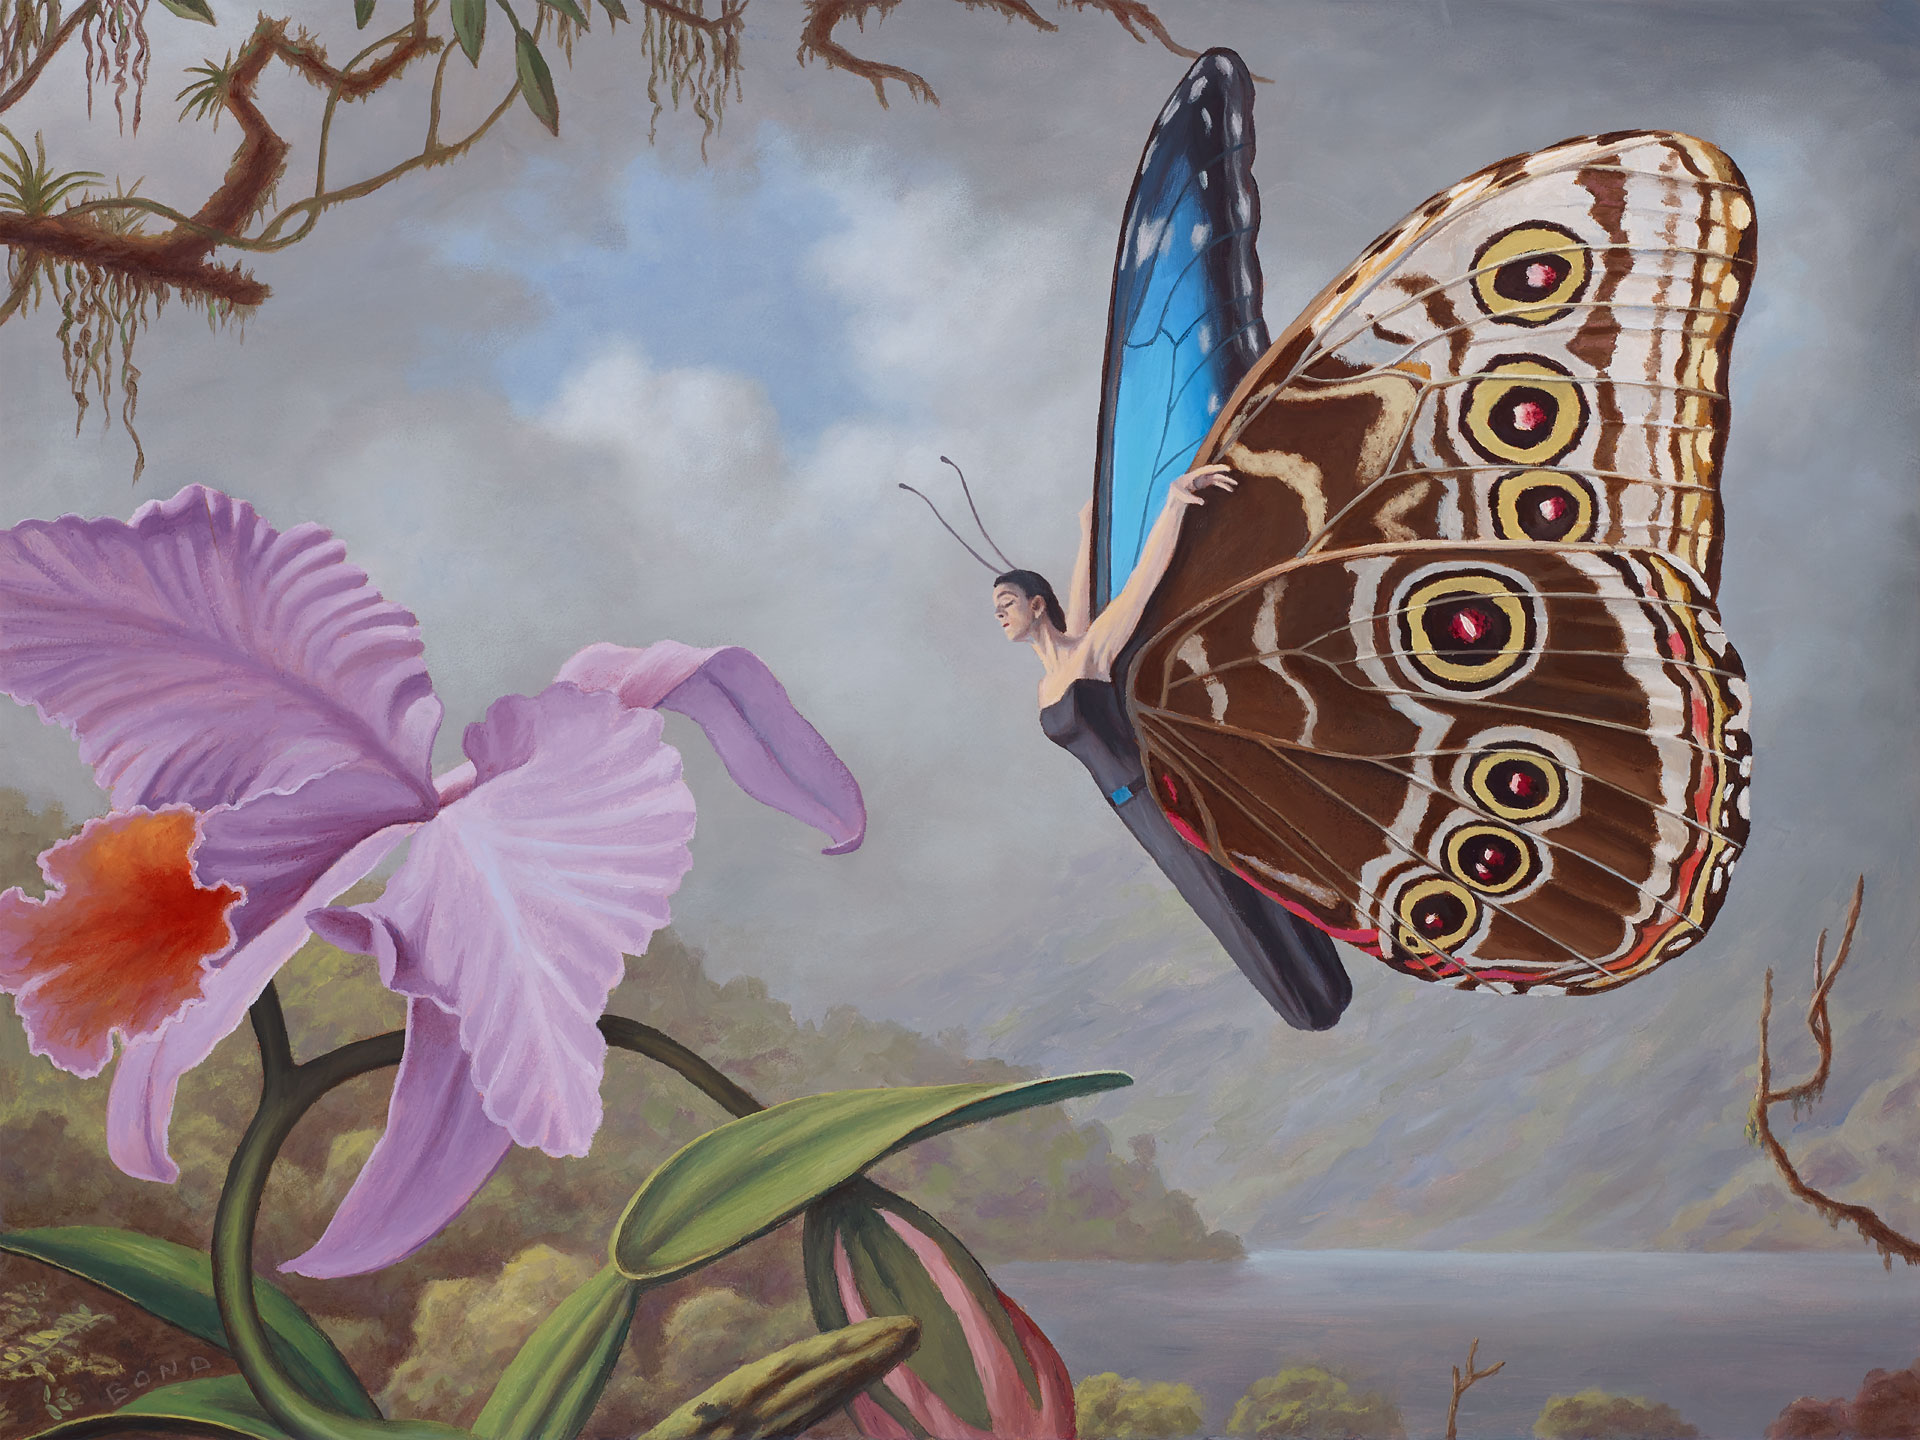 Morpho, painting of Blue Morpho Butterfly, art of Costa Rica, art with woman as butterfly, painting of tropical scene, orchid flower art, painting about transformation, soulful uplifting inspirational art, soul stirring illusion art, romantic art,  surrealism, surreal art, dreamlike imagery, fanciful art, fantasy art, dreamscape visual, metaphysical art, spiritual painting, metaphysical painting, spiritual art, whimsical art, whimsy art, dream art, fantastic realism art, magic realism oil painting by Paul Bond